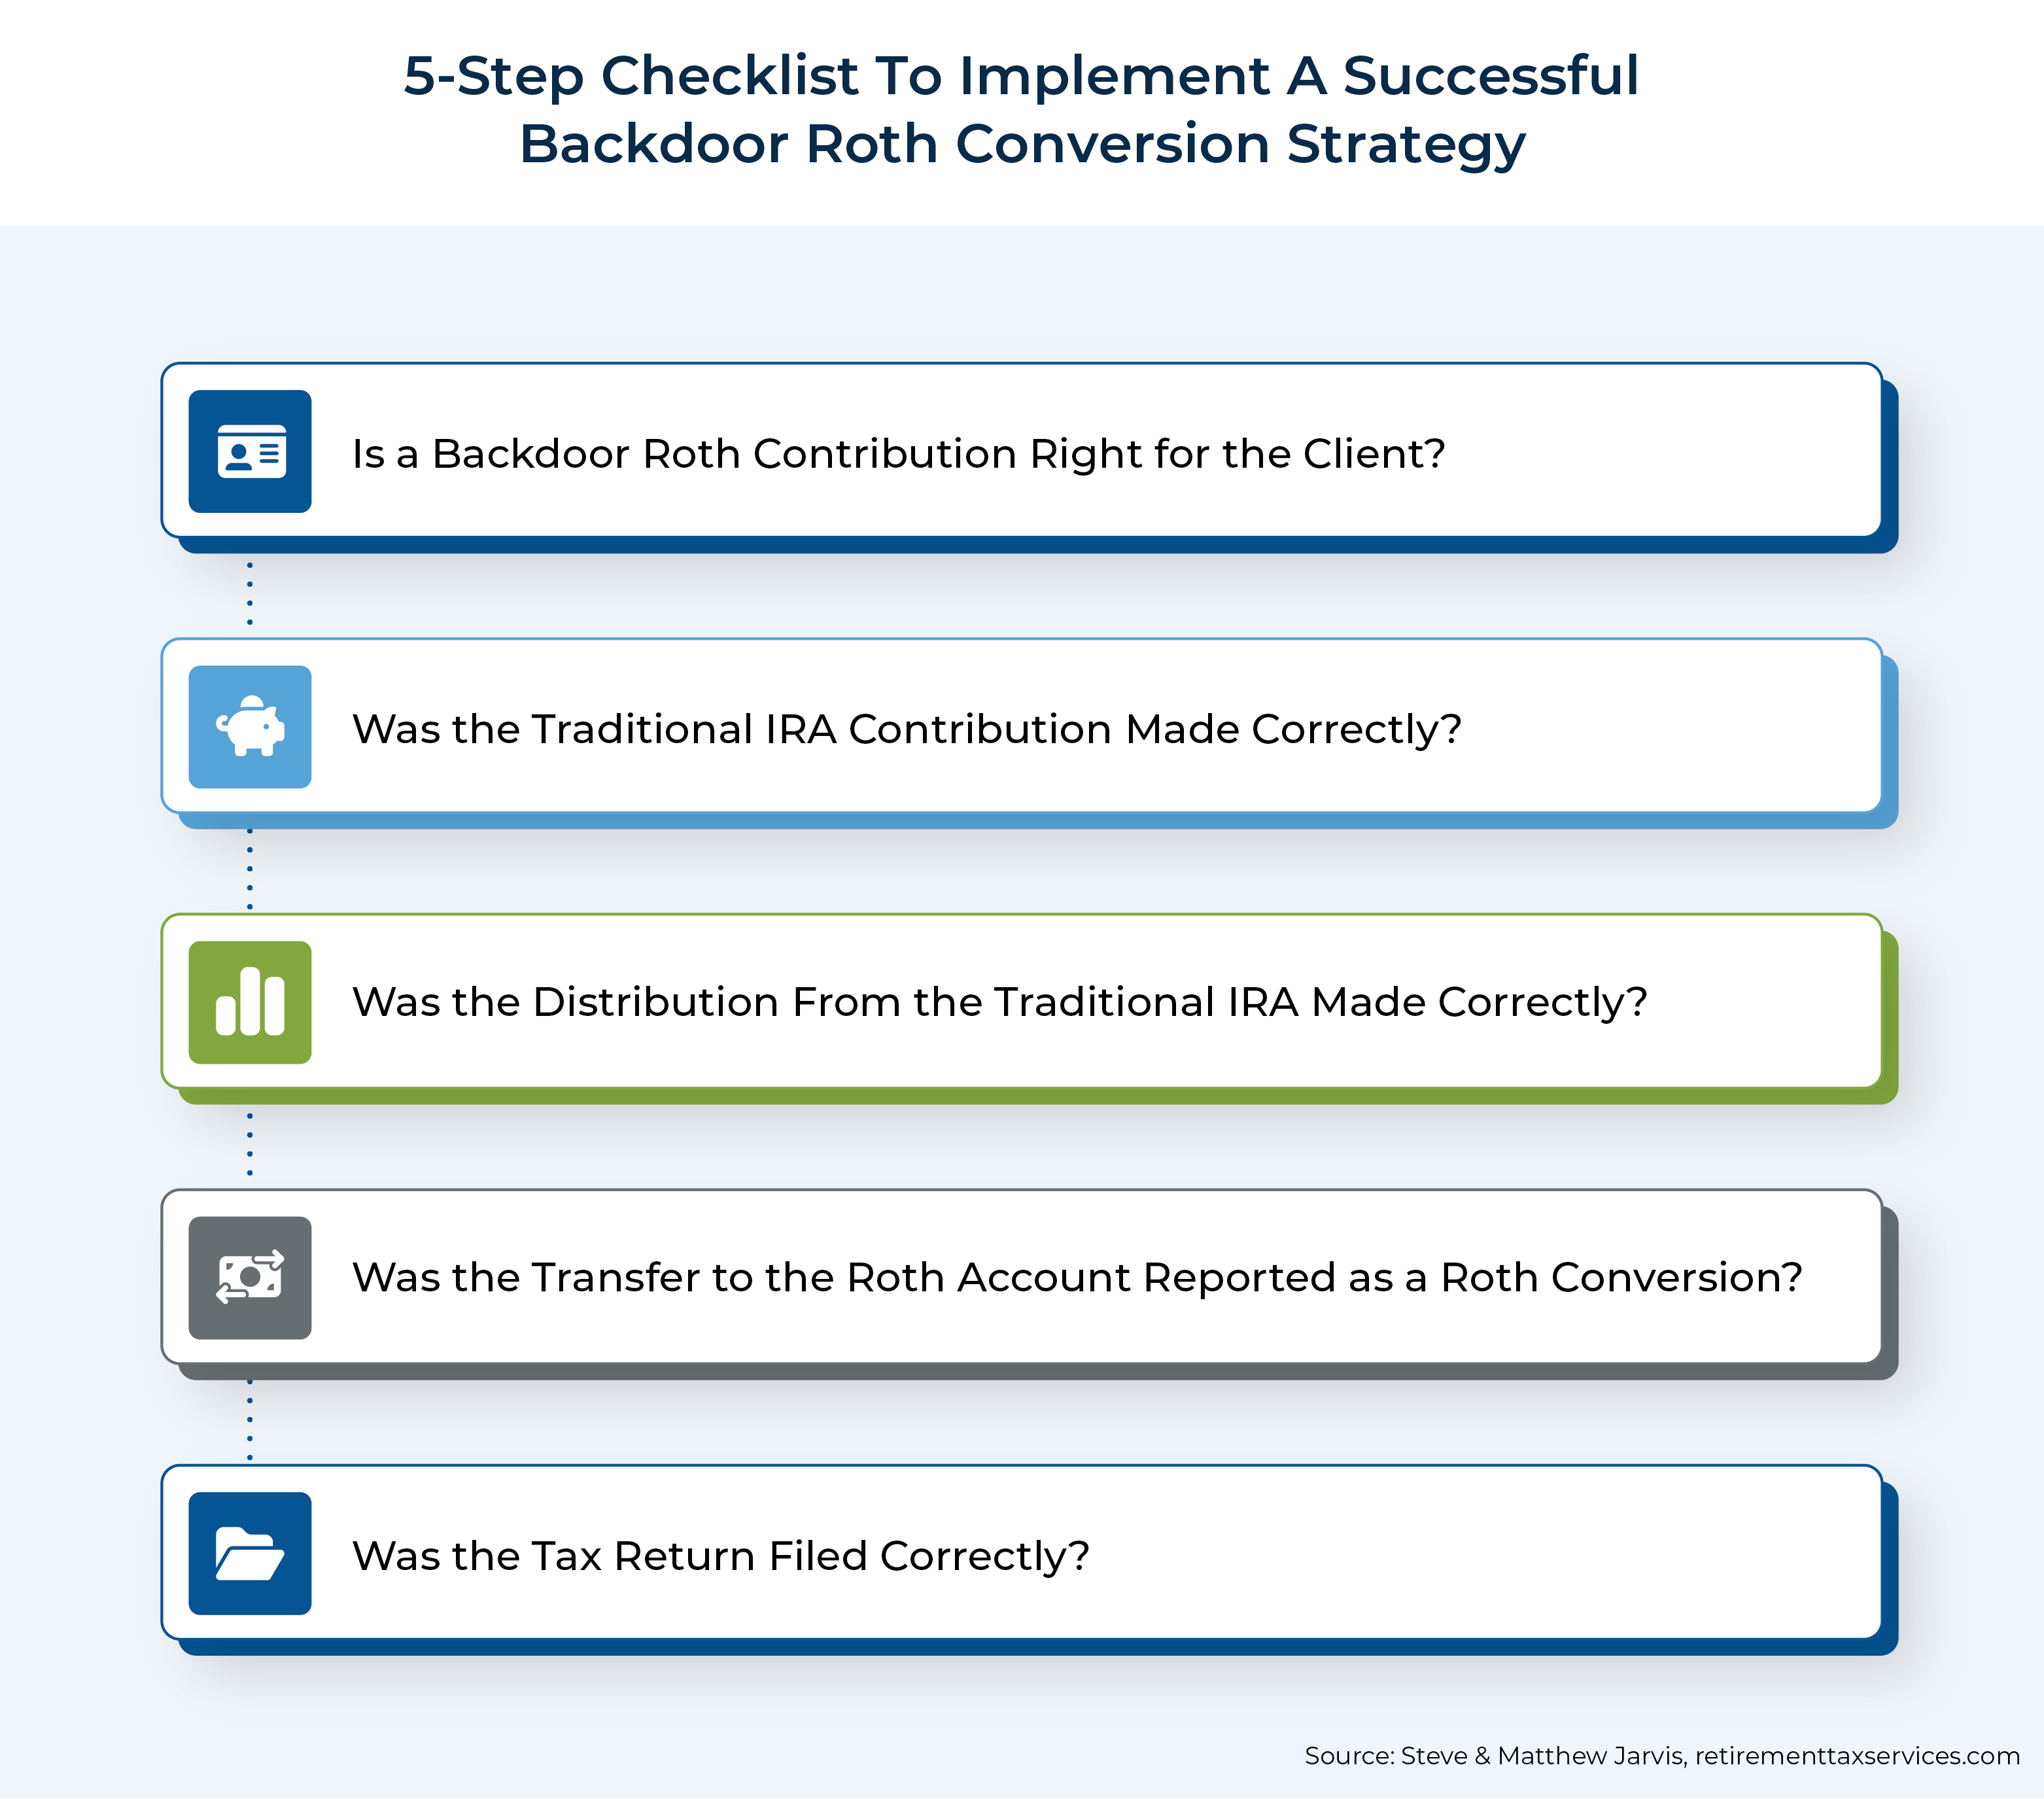 Step Checklist To Implement A Successful Backdoor Roth Conversion Strategy